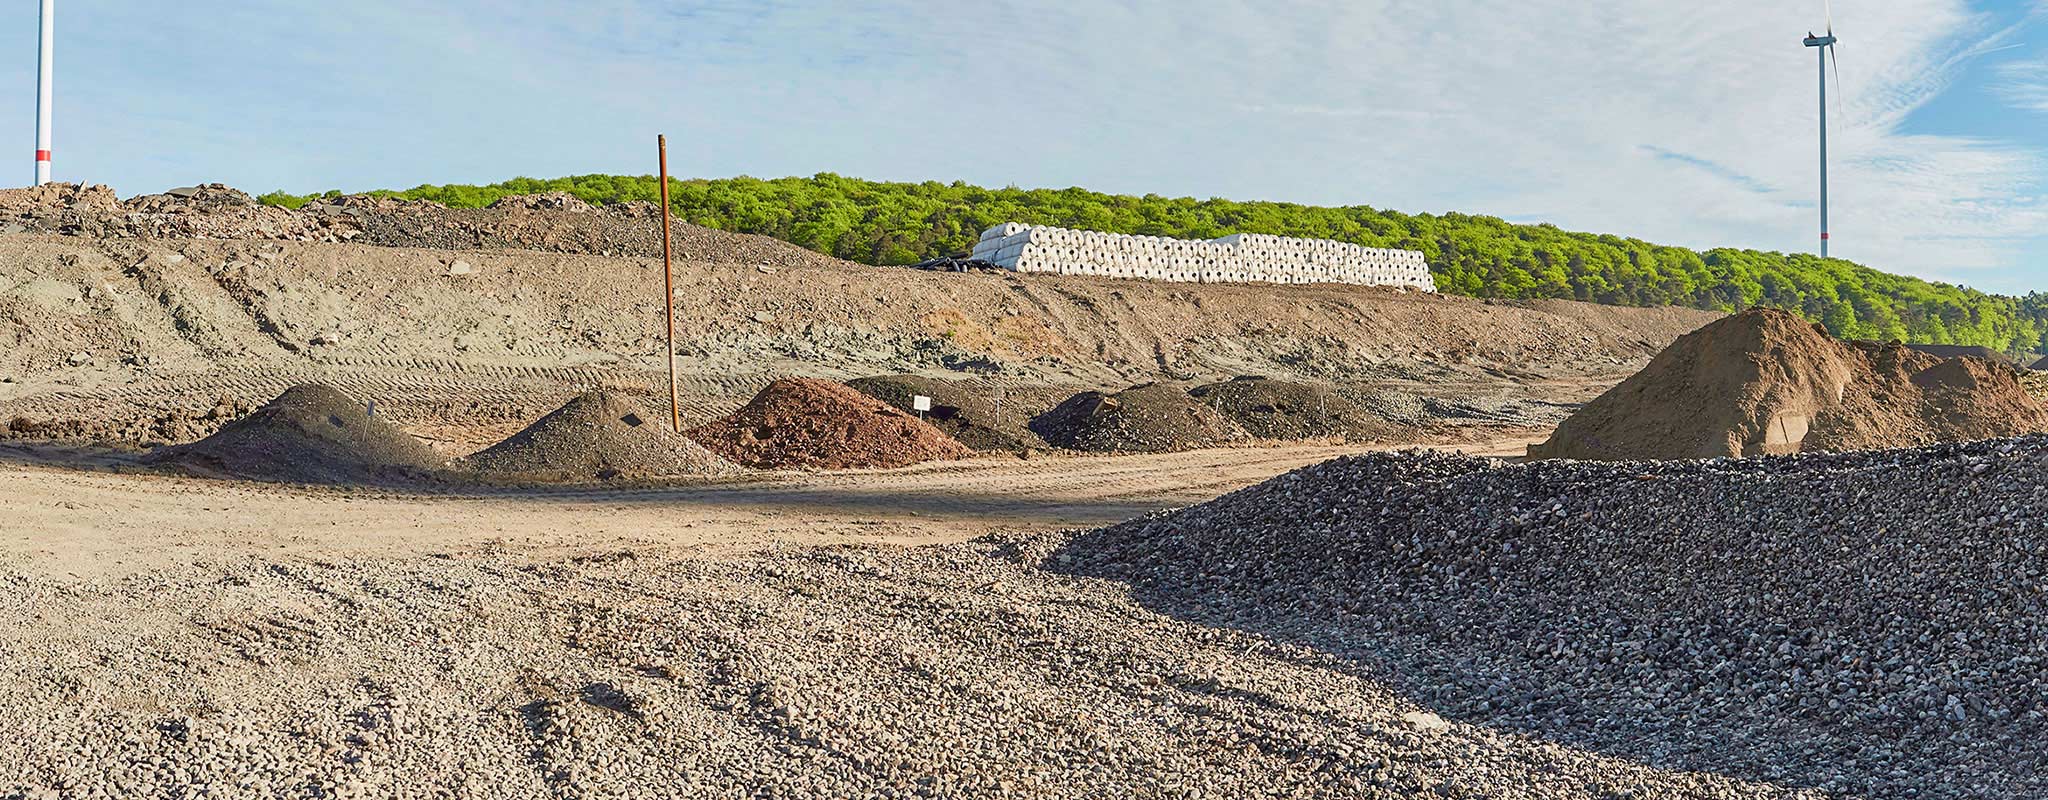 Landfill construction materials from mineral waste